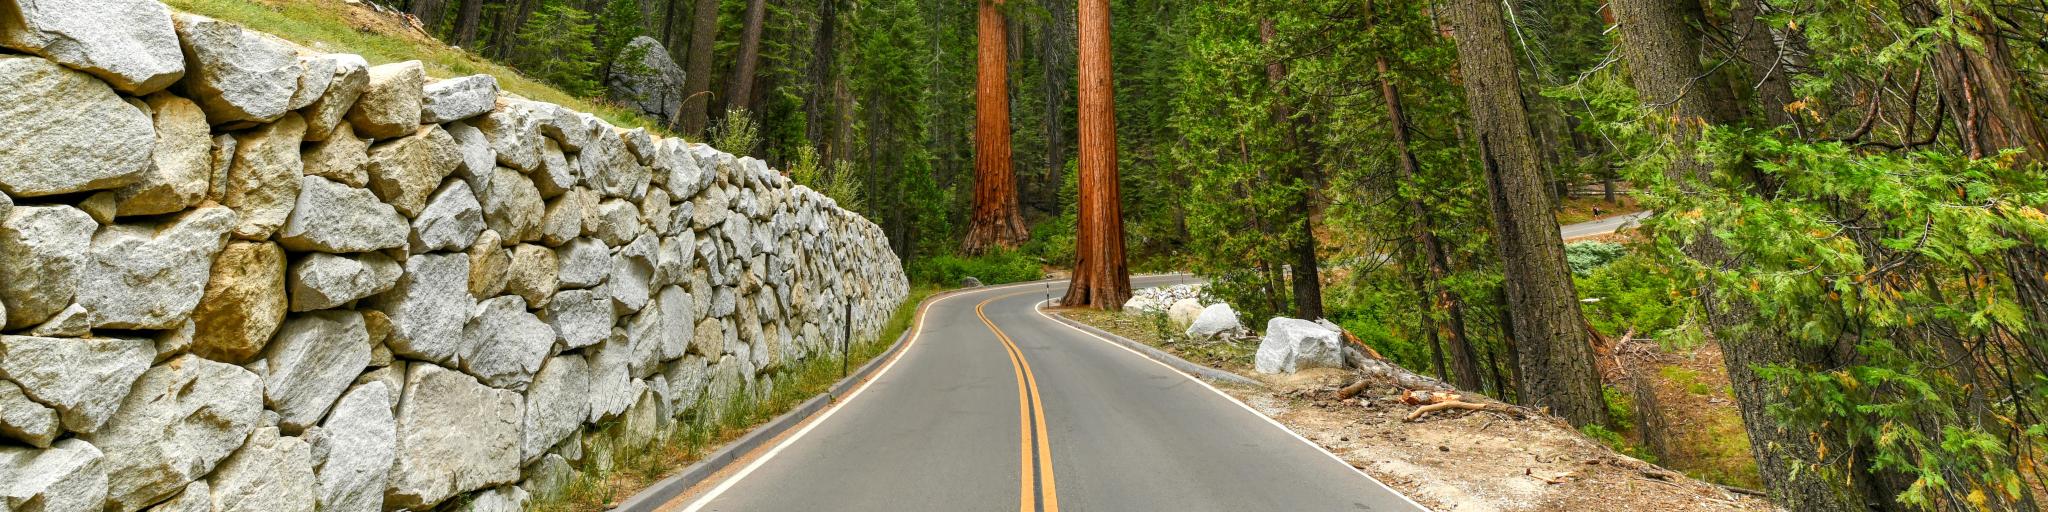 Giant Sequoia trees in Mariposa Grove, with empty road weaving through the forests